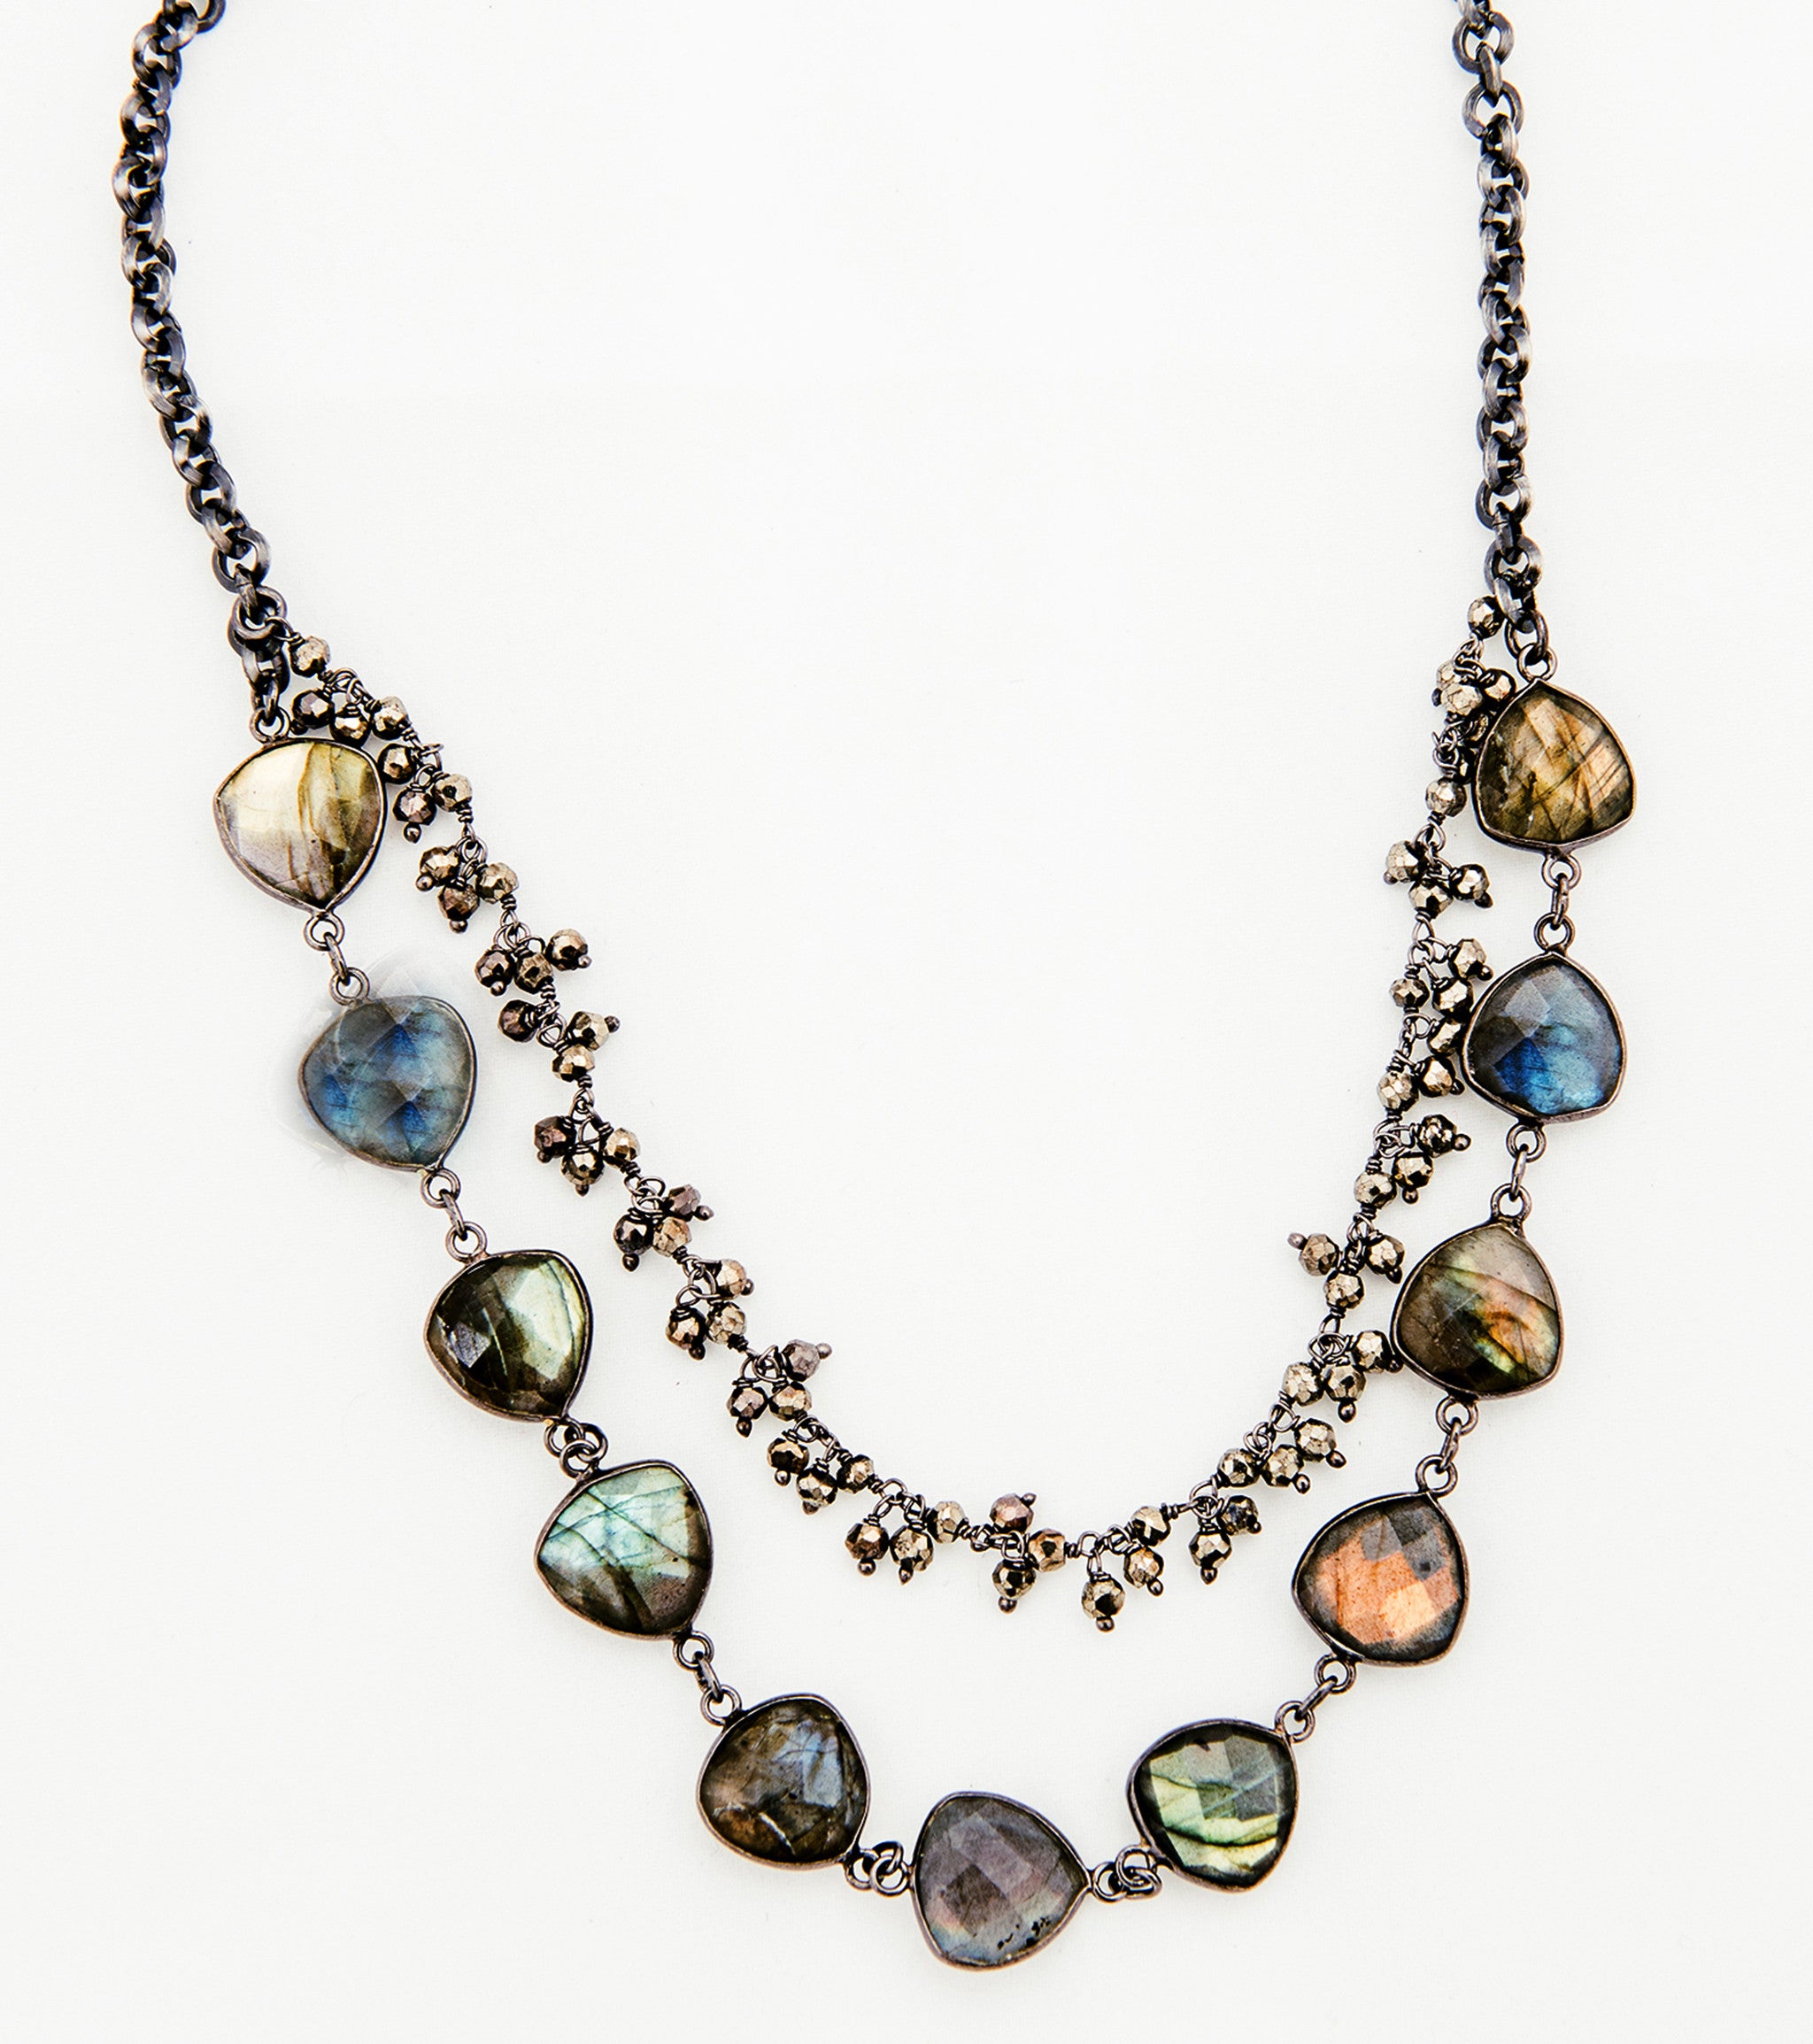 Short Labradorite  necklace with double Pyrite Chain